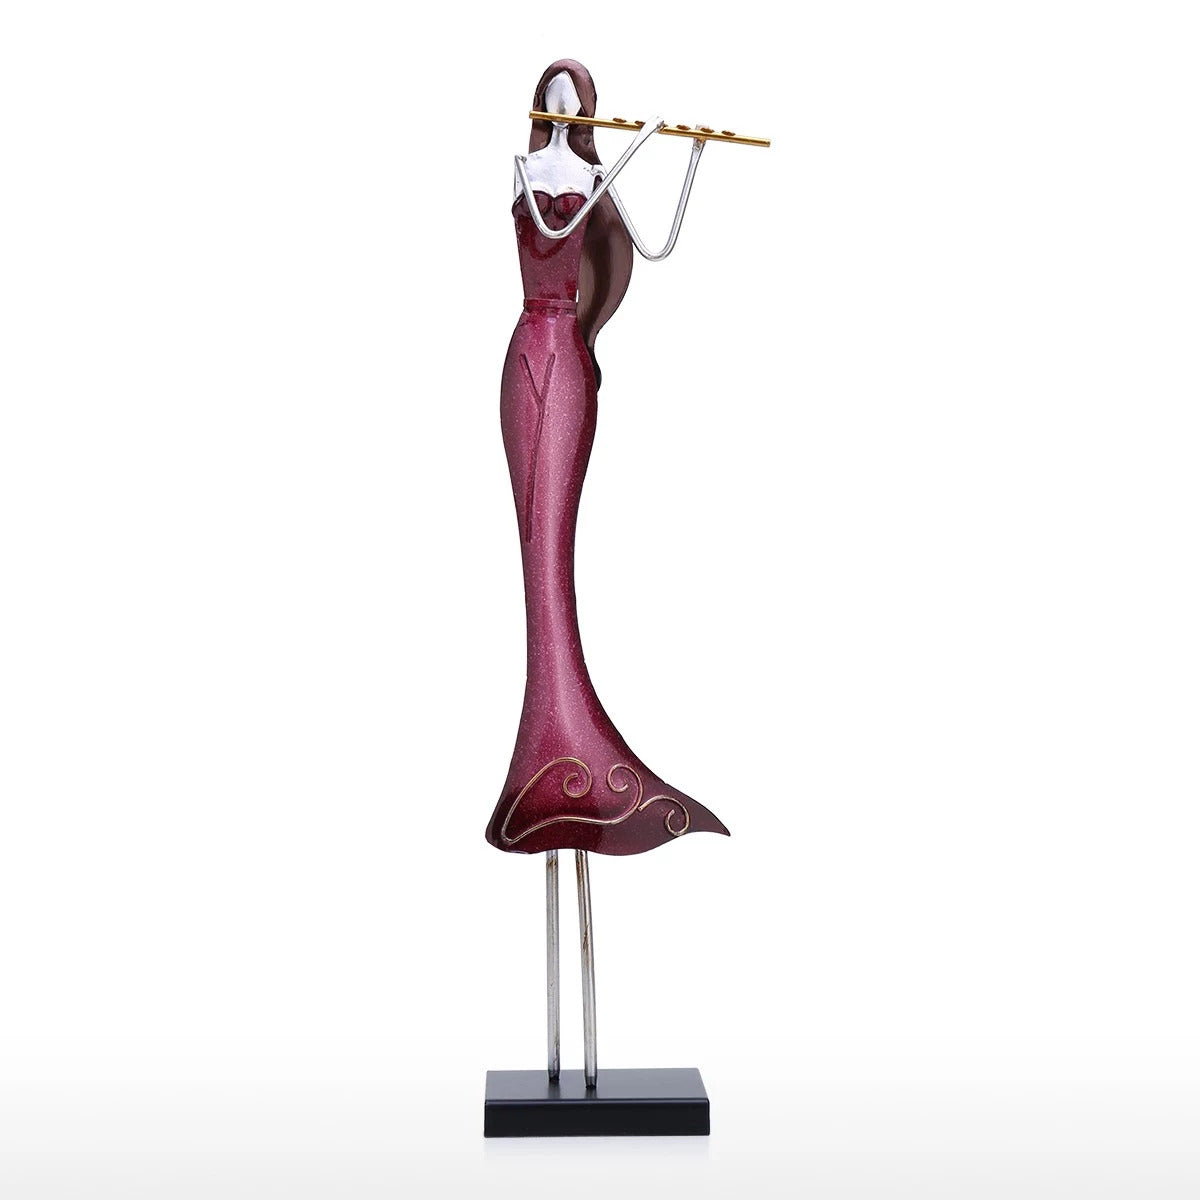 Unique Gifts For Flute Players and Flutist with Decorative Ornament Statue